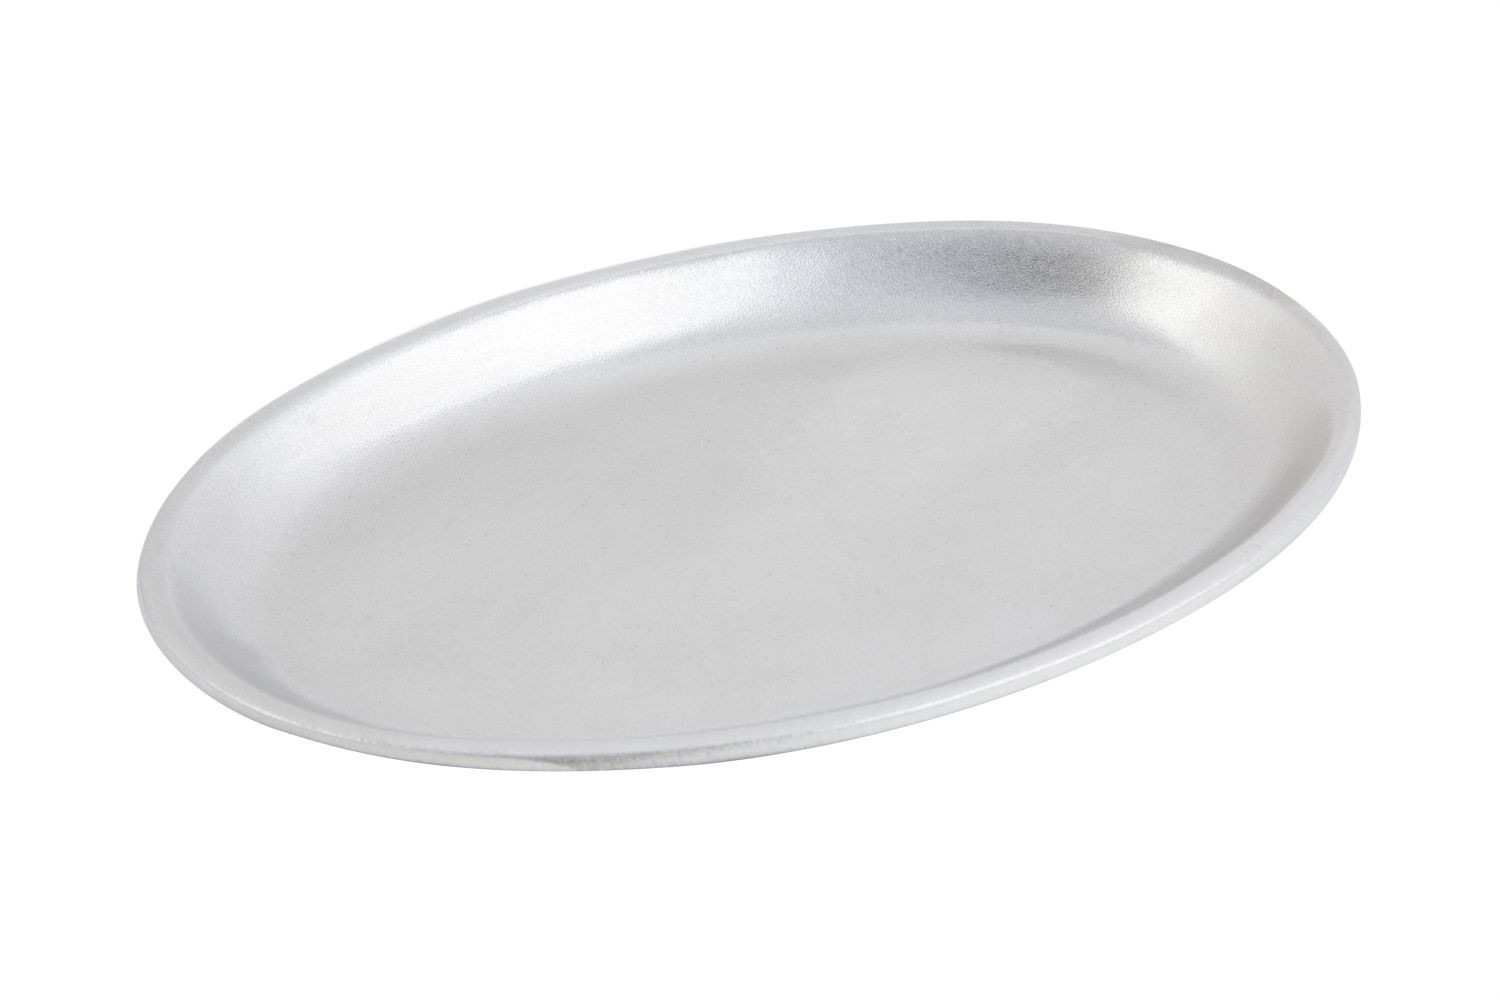 Bon Chef 2040P Oval Platter, Pewter Glo 7 5/8" x 11 3/4", Set of 6